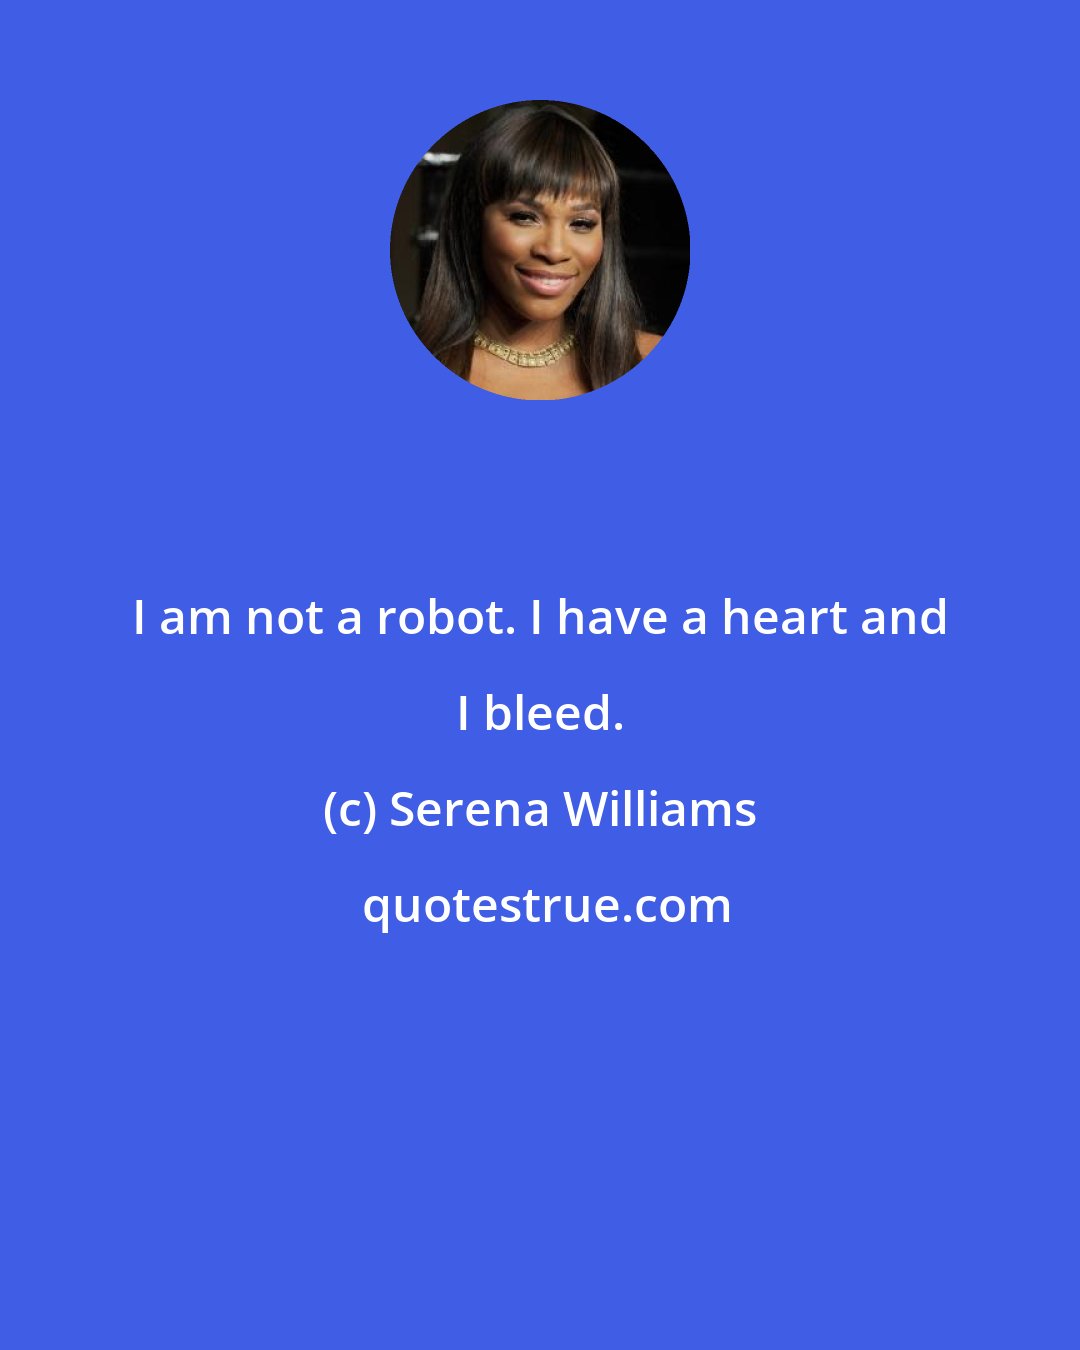 Serena Williams: I am not a robot. I have a heart and I bleed.